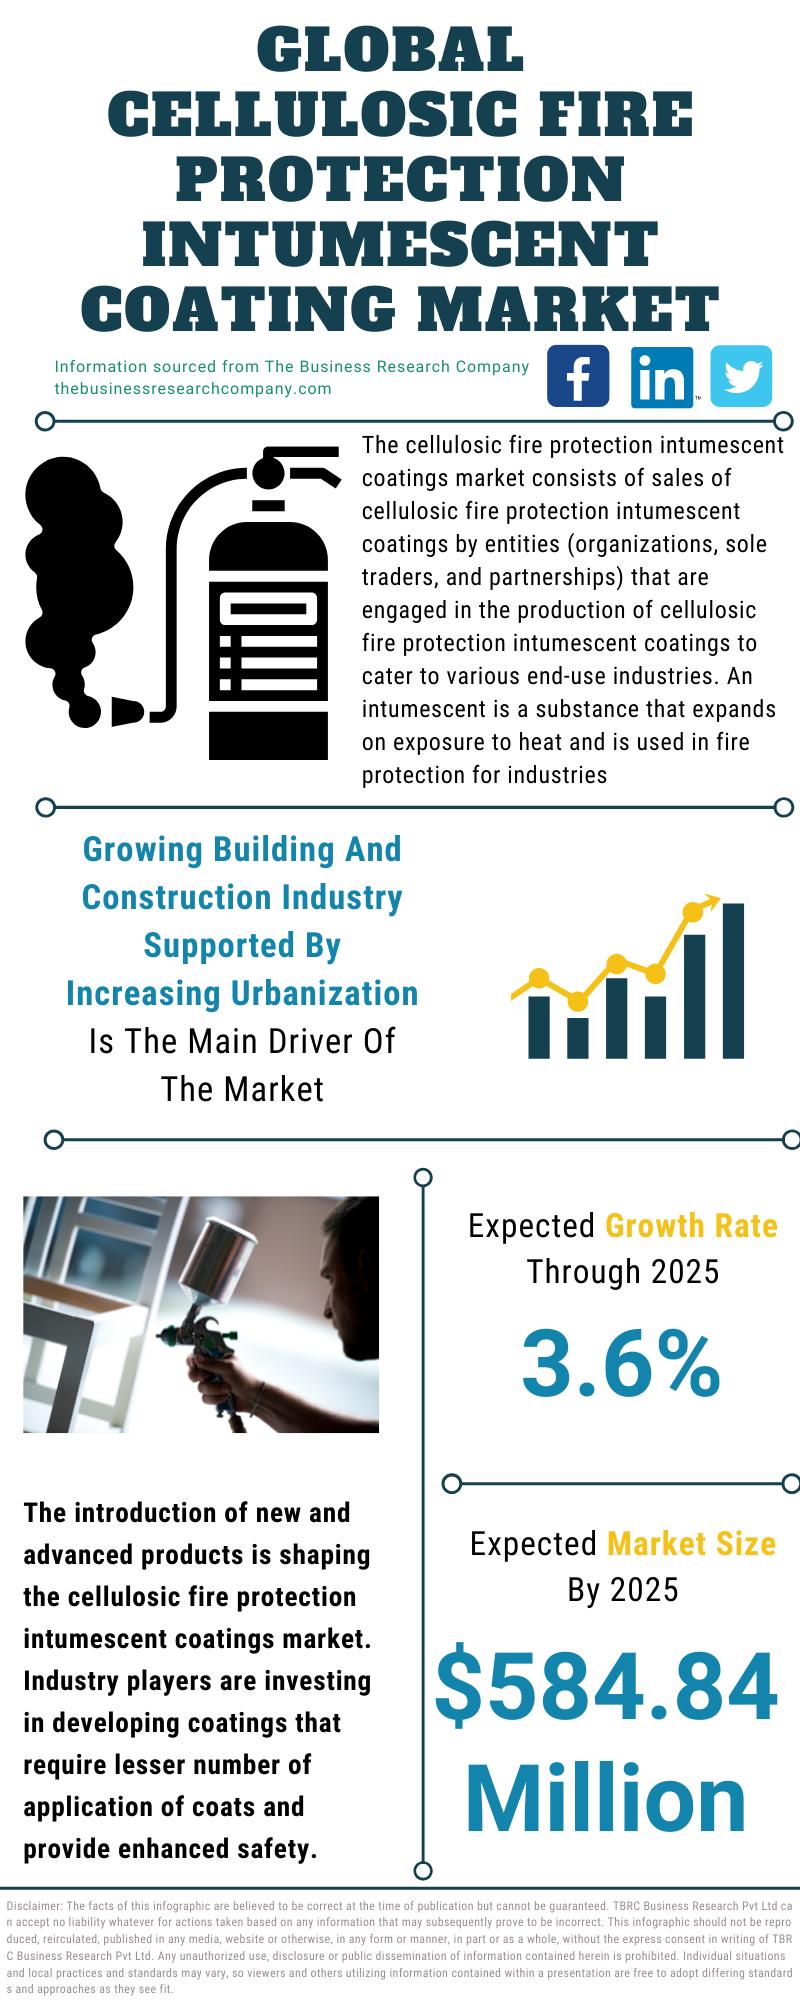 Cellulosic Fire Protection Intumescent Coating Market